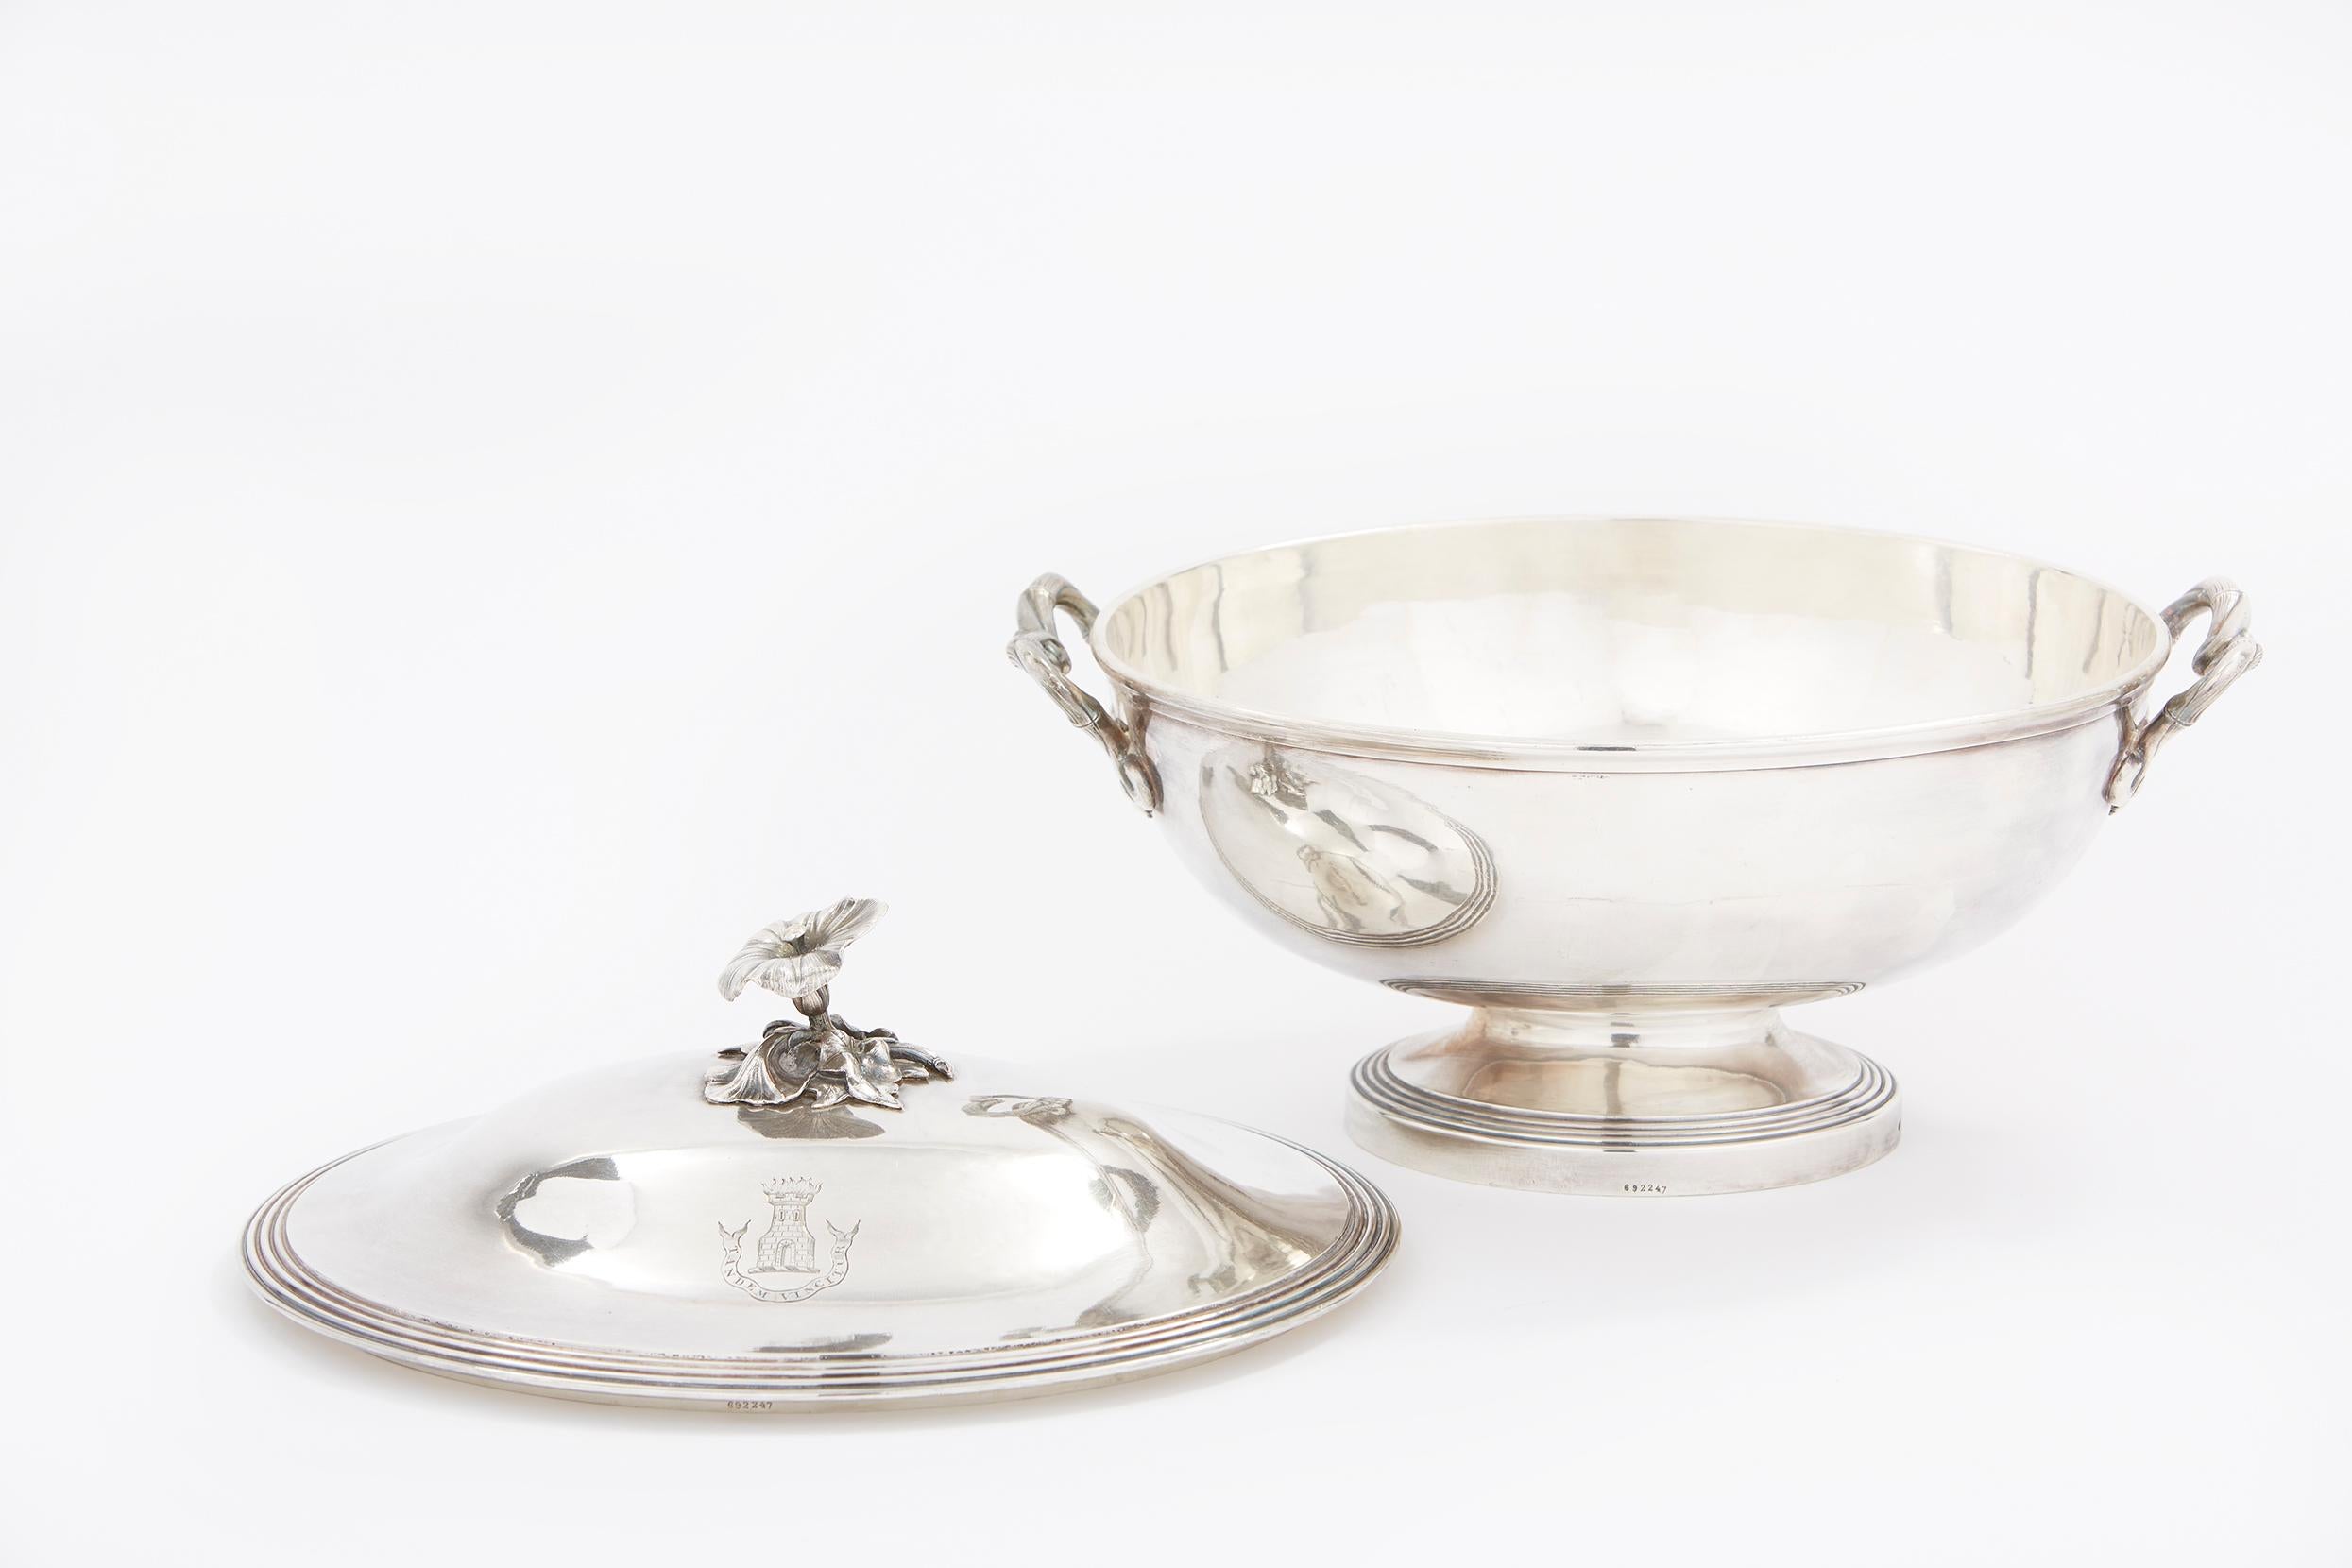 Elegant and refined French silver plated tableware covered soup tureen / serving piece with side handles and exterior design details. The tureen is in great condition. Minor wear consistent with age / use. Numbered & mark undersigned. The tureen